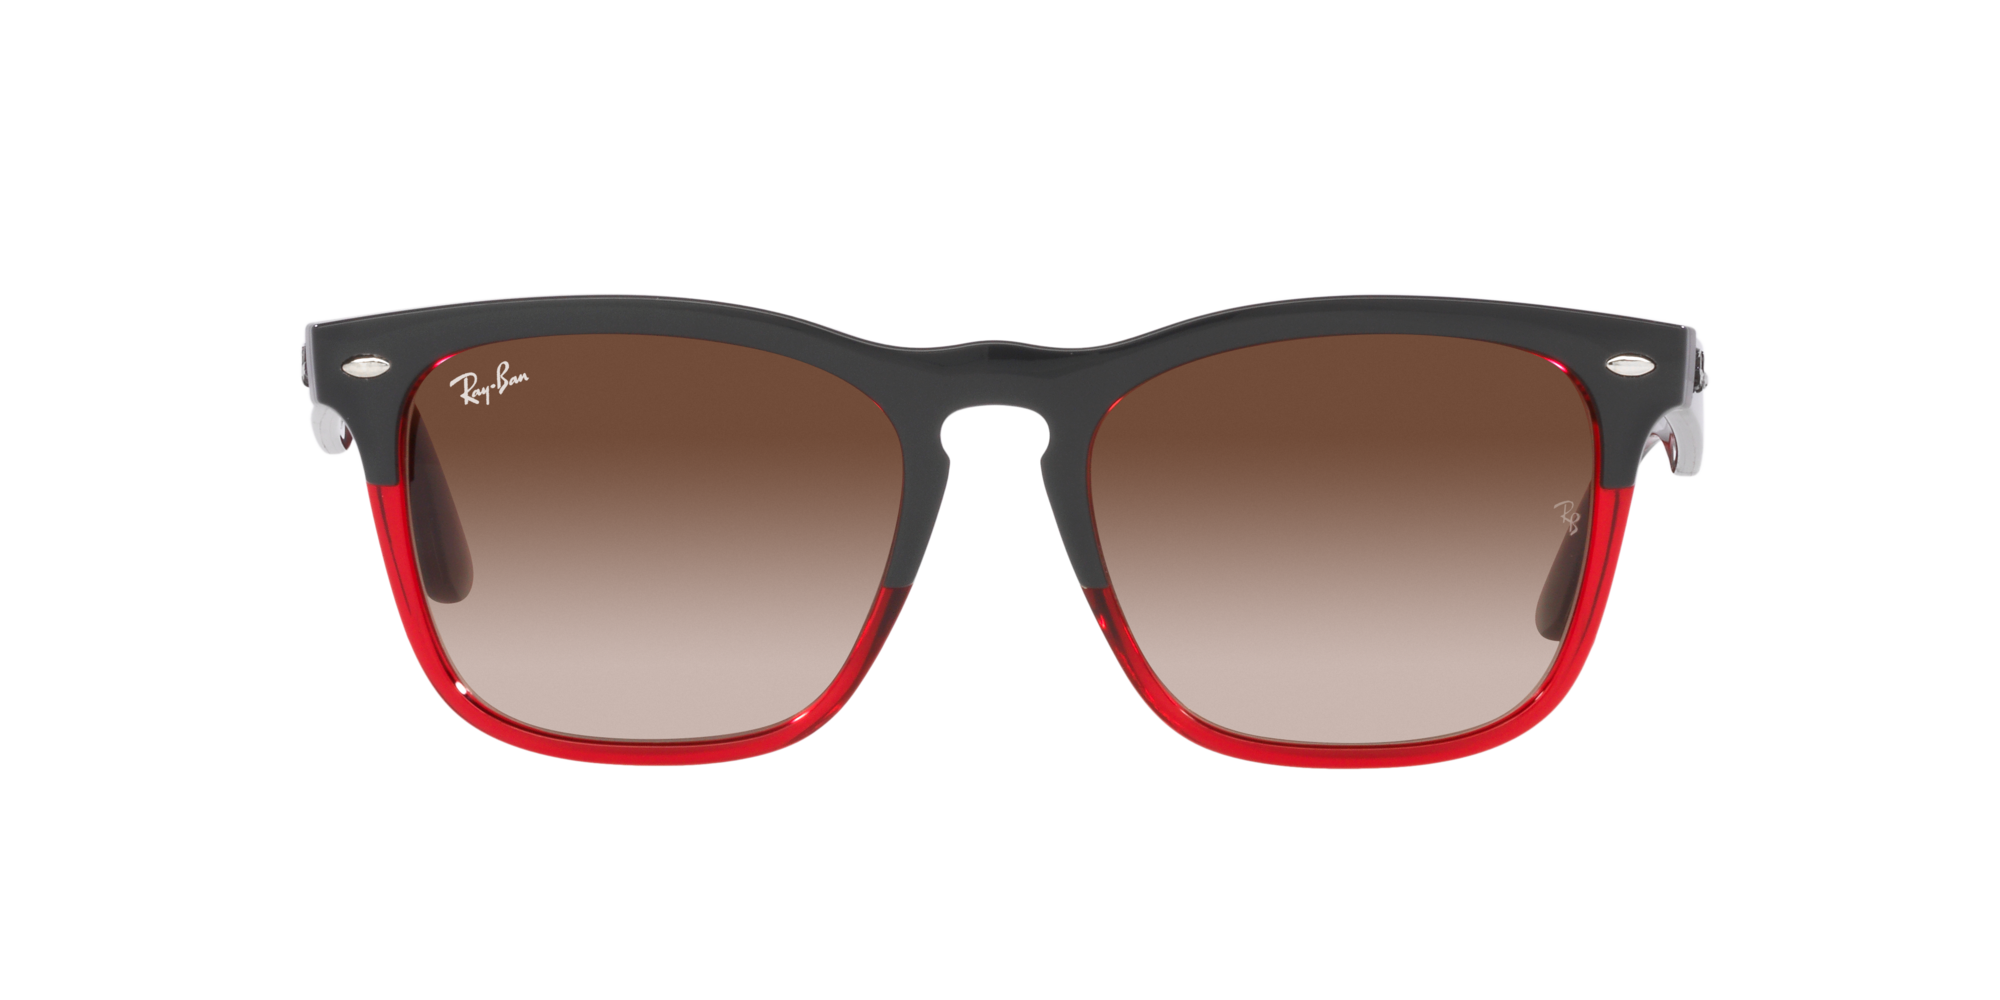 Ray Ban Unisex Sonnenbrille in Grau/Rot RB4487 663113 54